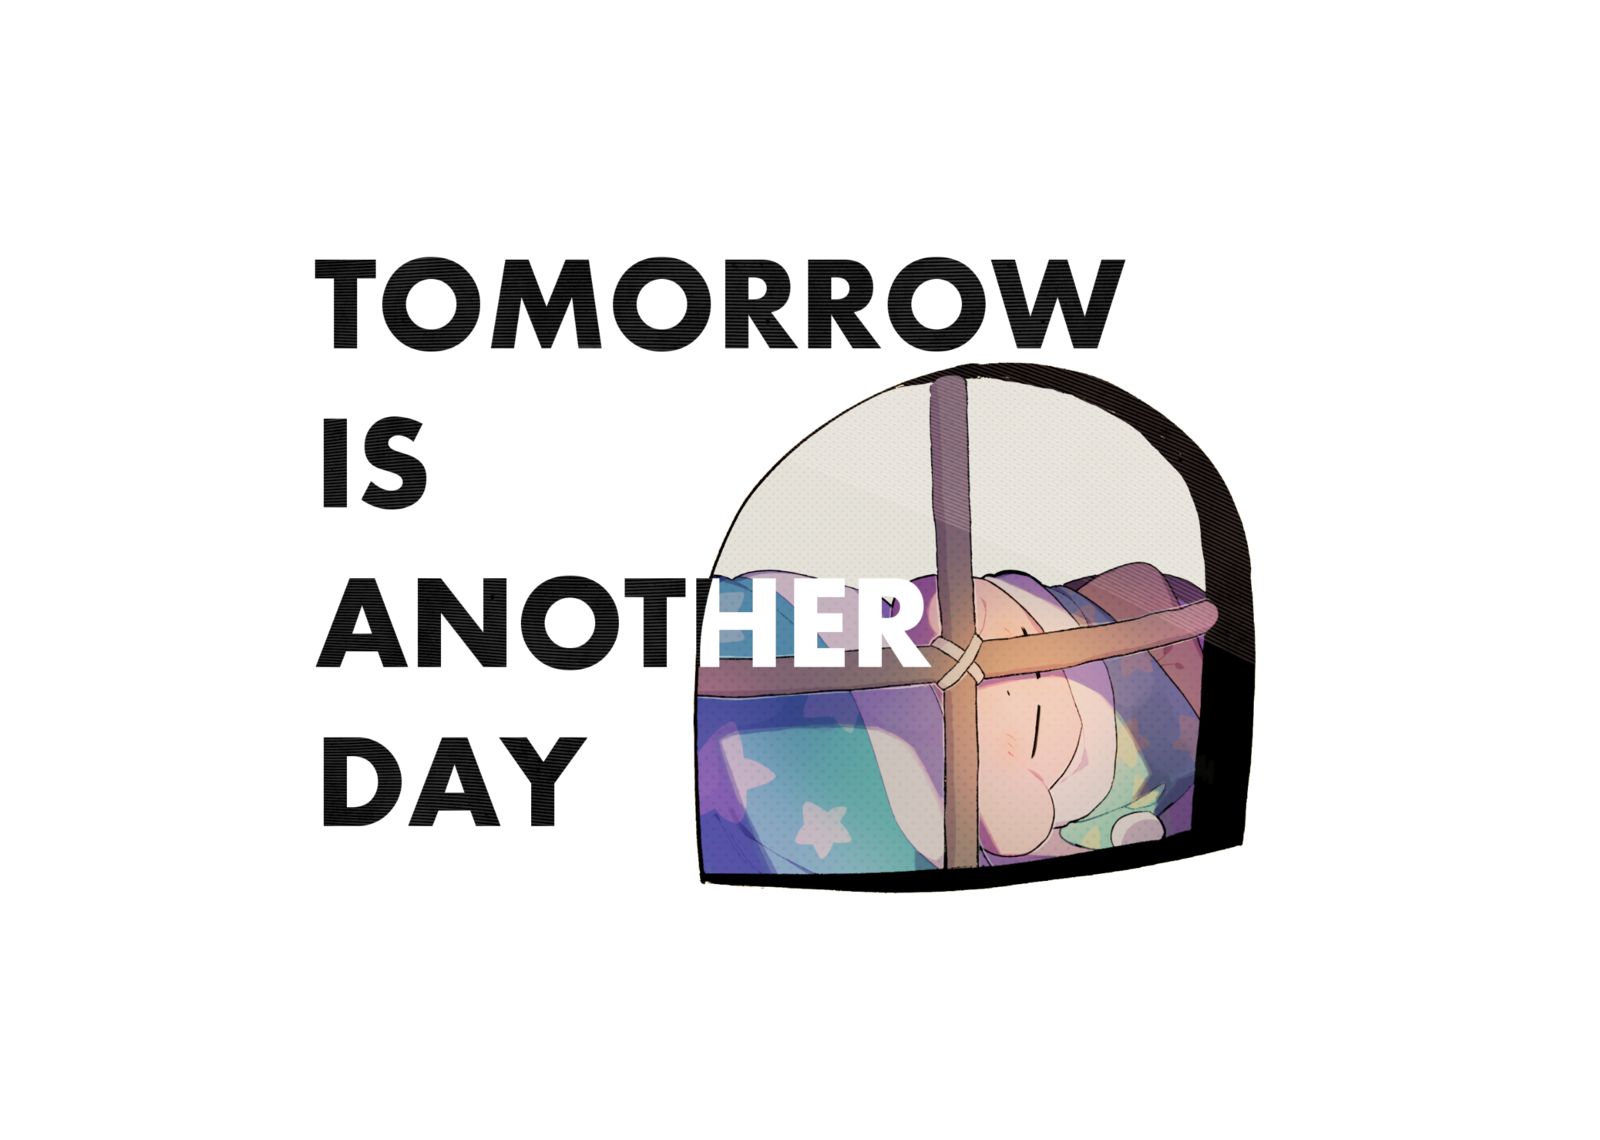 【WEB再録】TOMORROW IS ANOTHER DAY插画图片壁纸